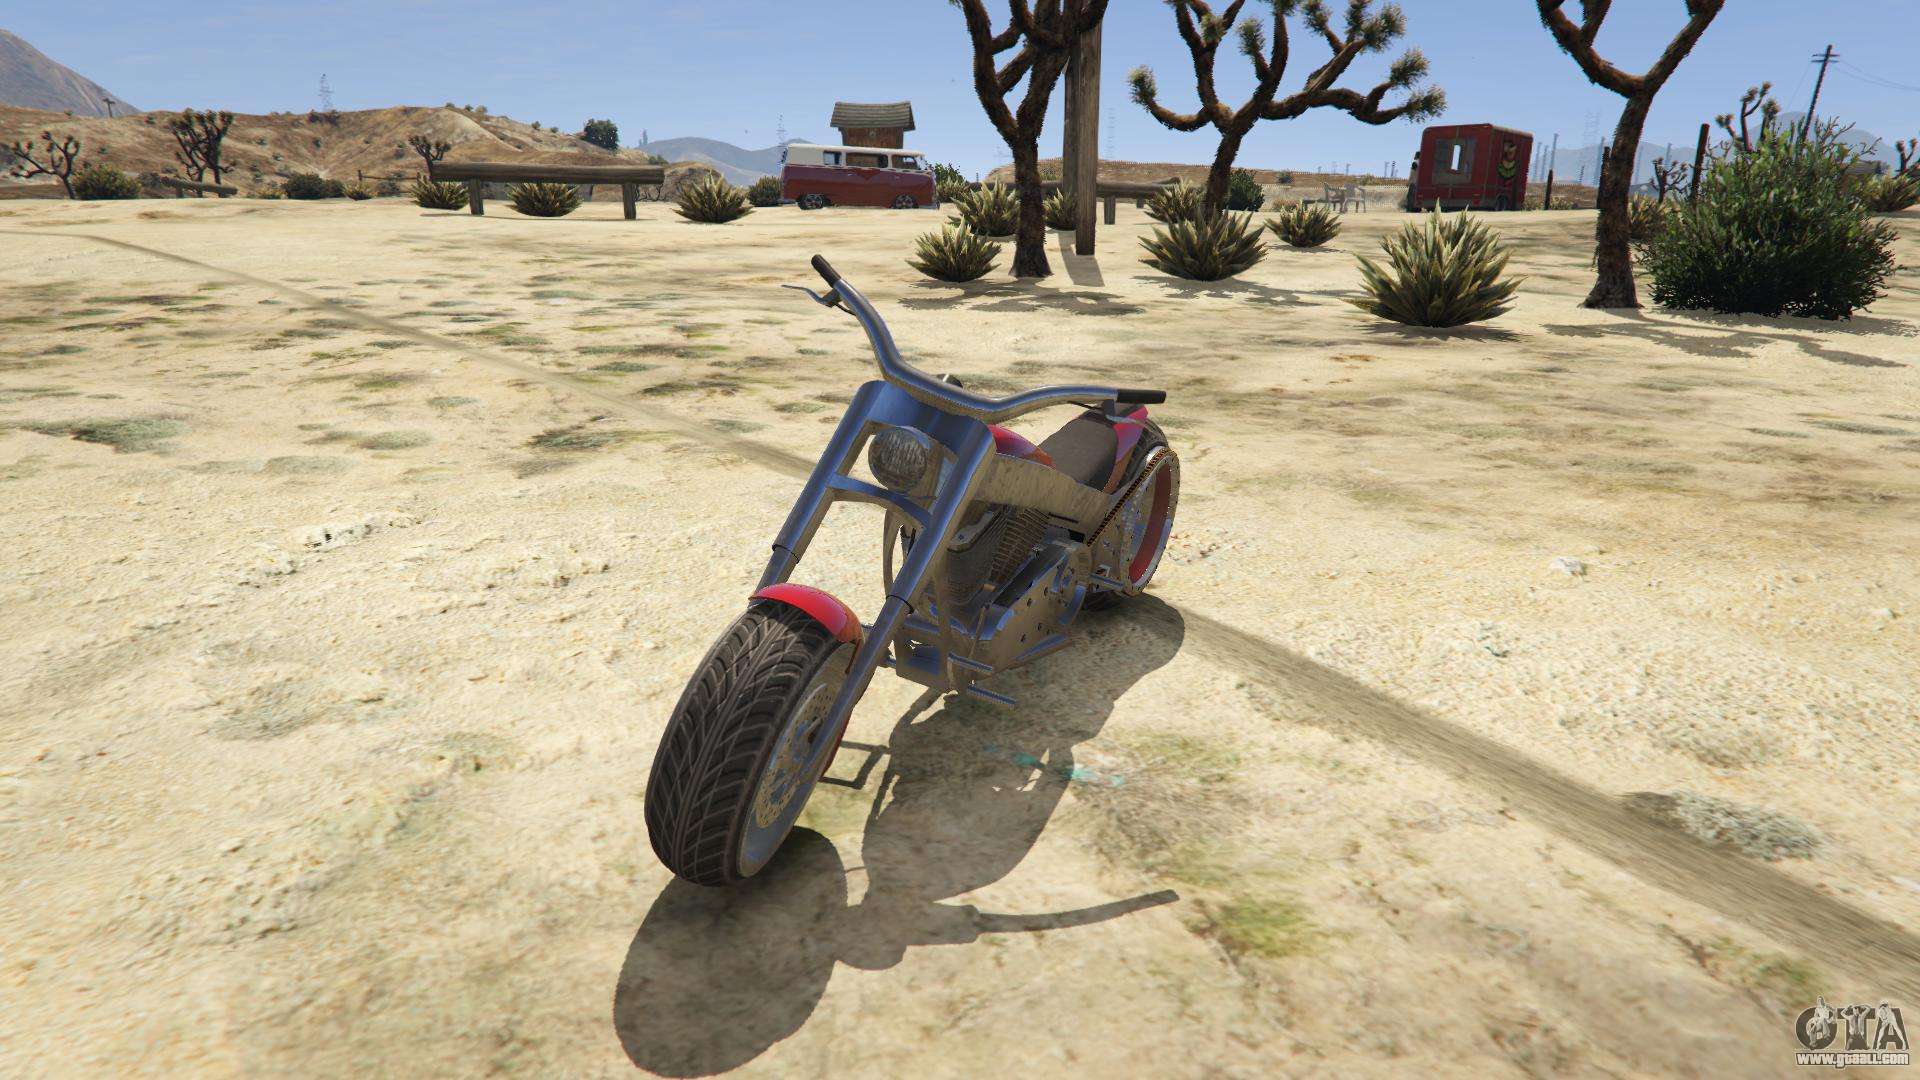 Liberty City Cycles Innovation from GTA 5